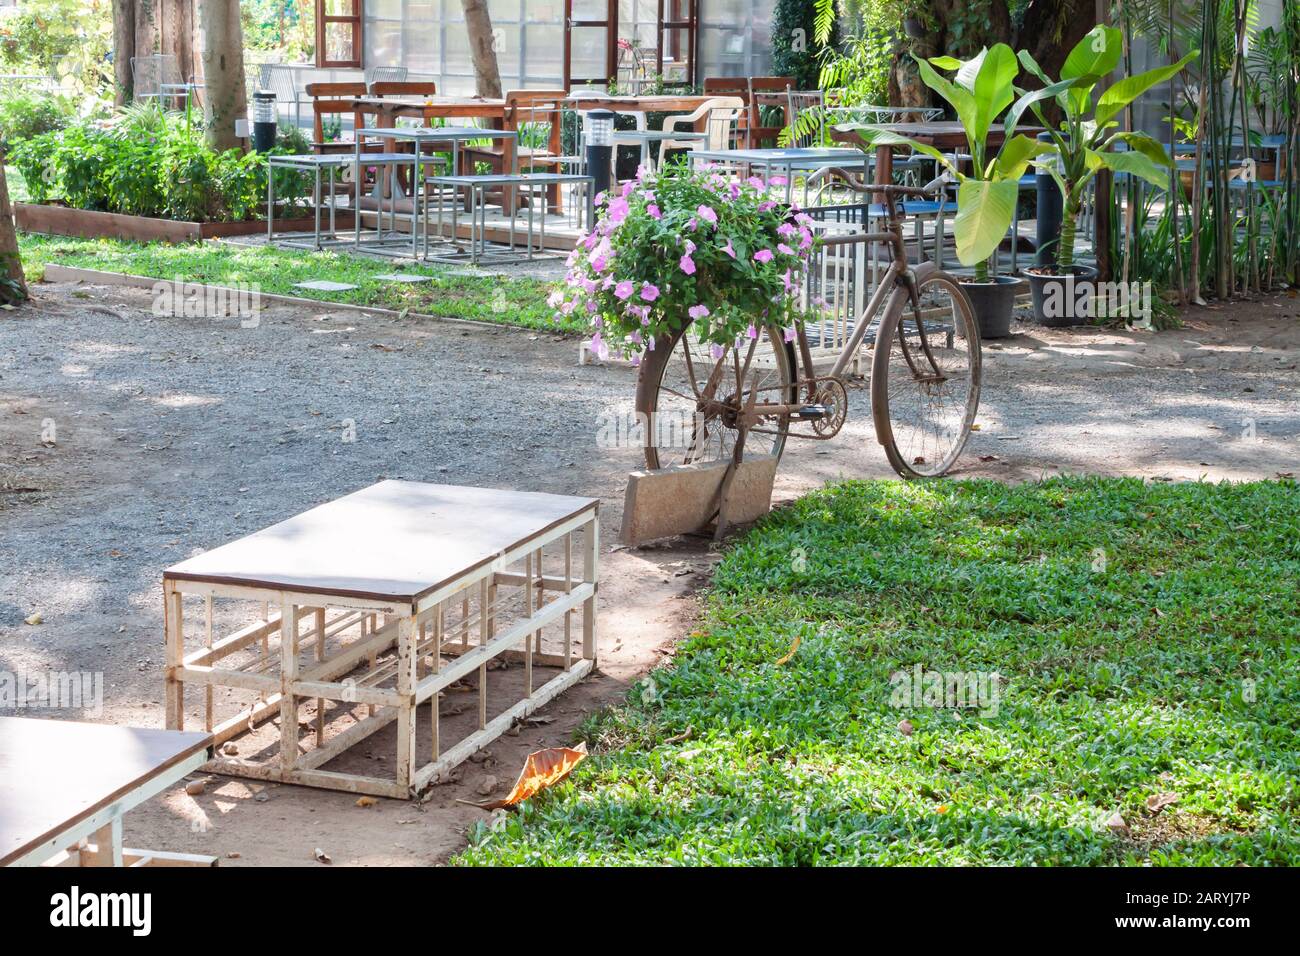 Garden decorated in coffee shop, stock photo Stock Photo